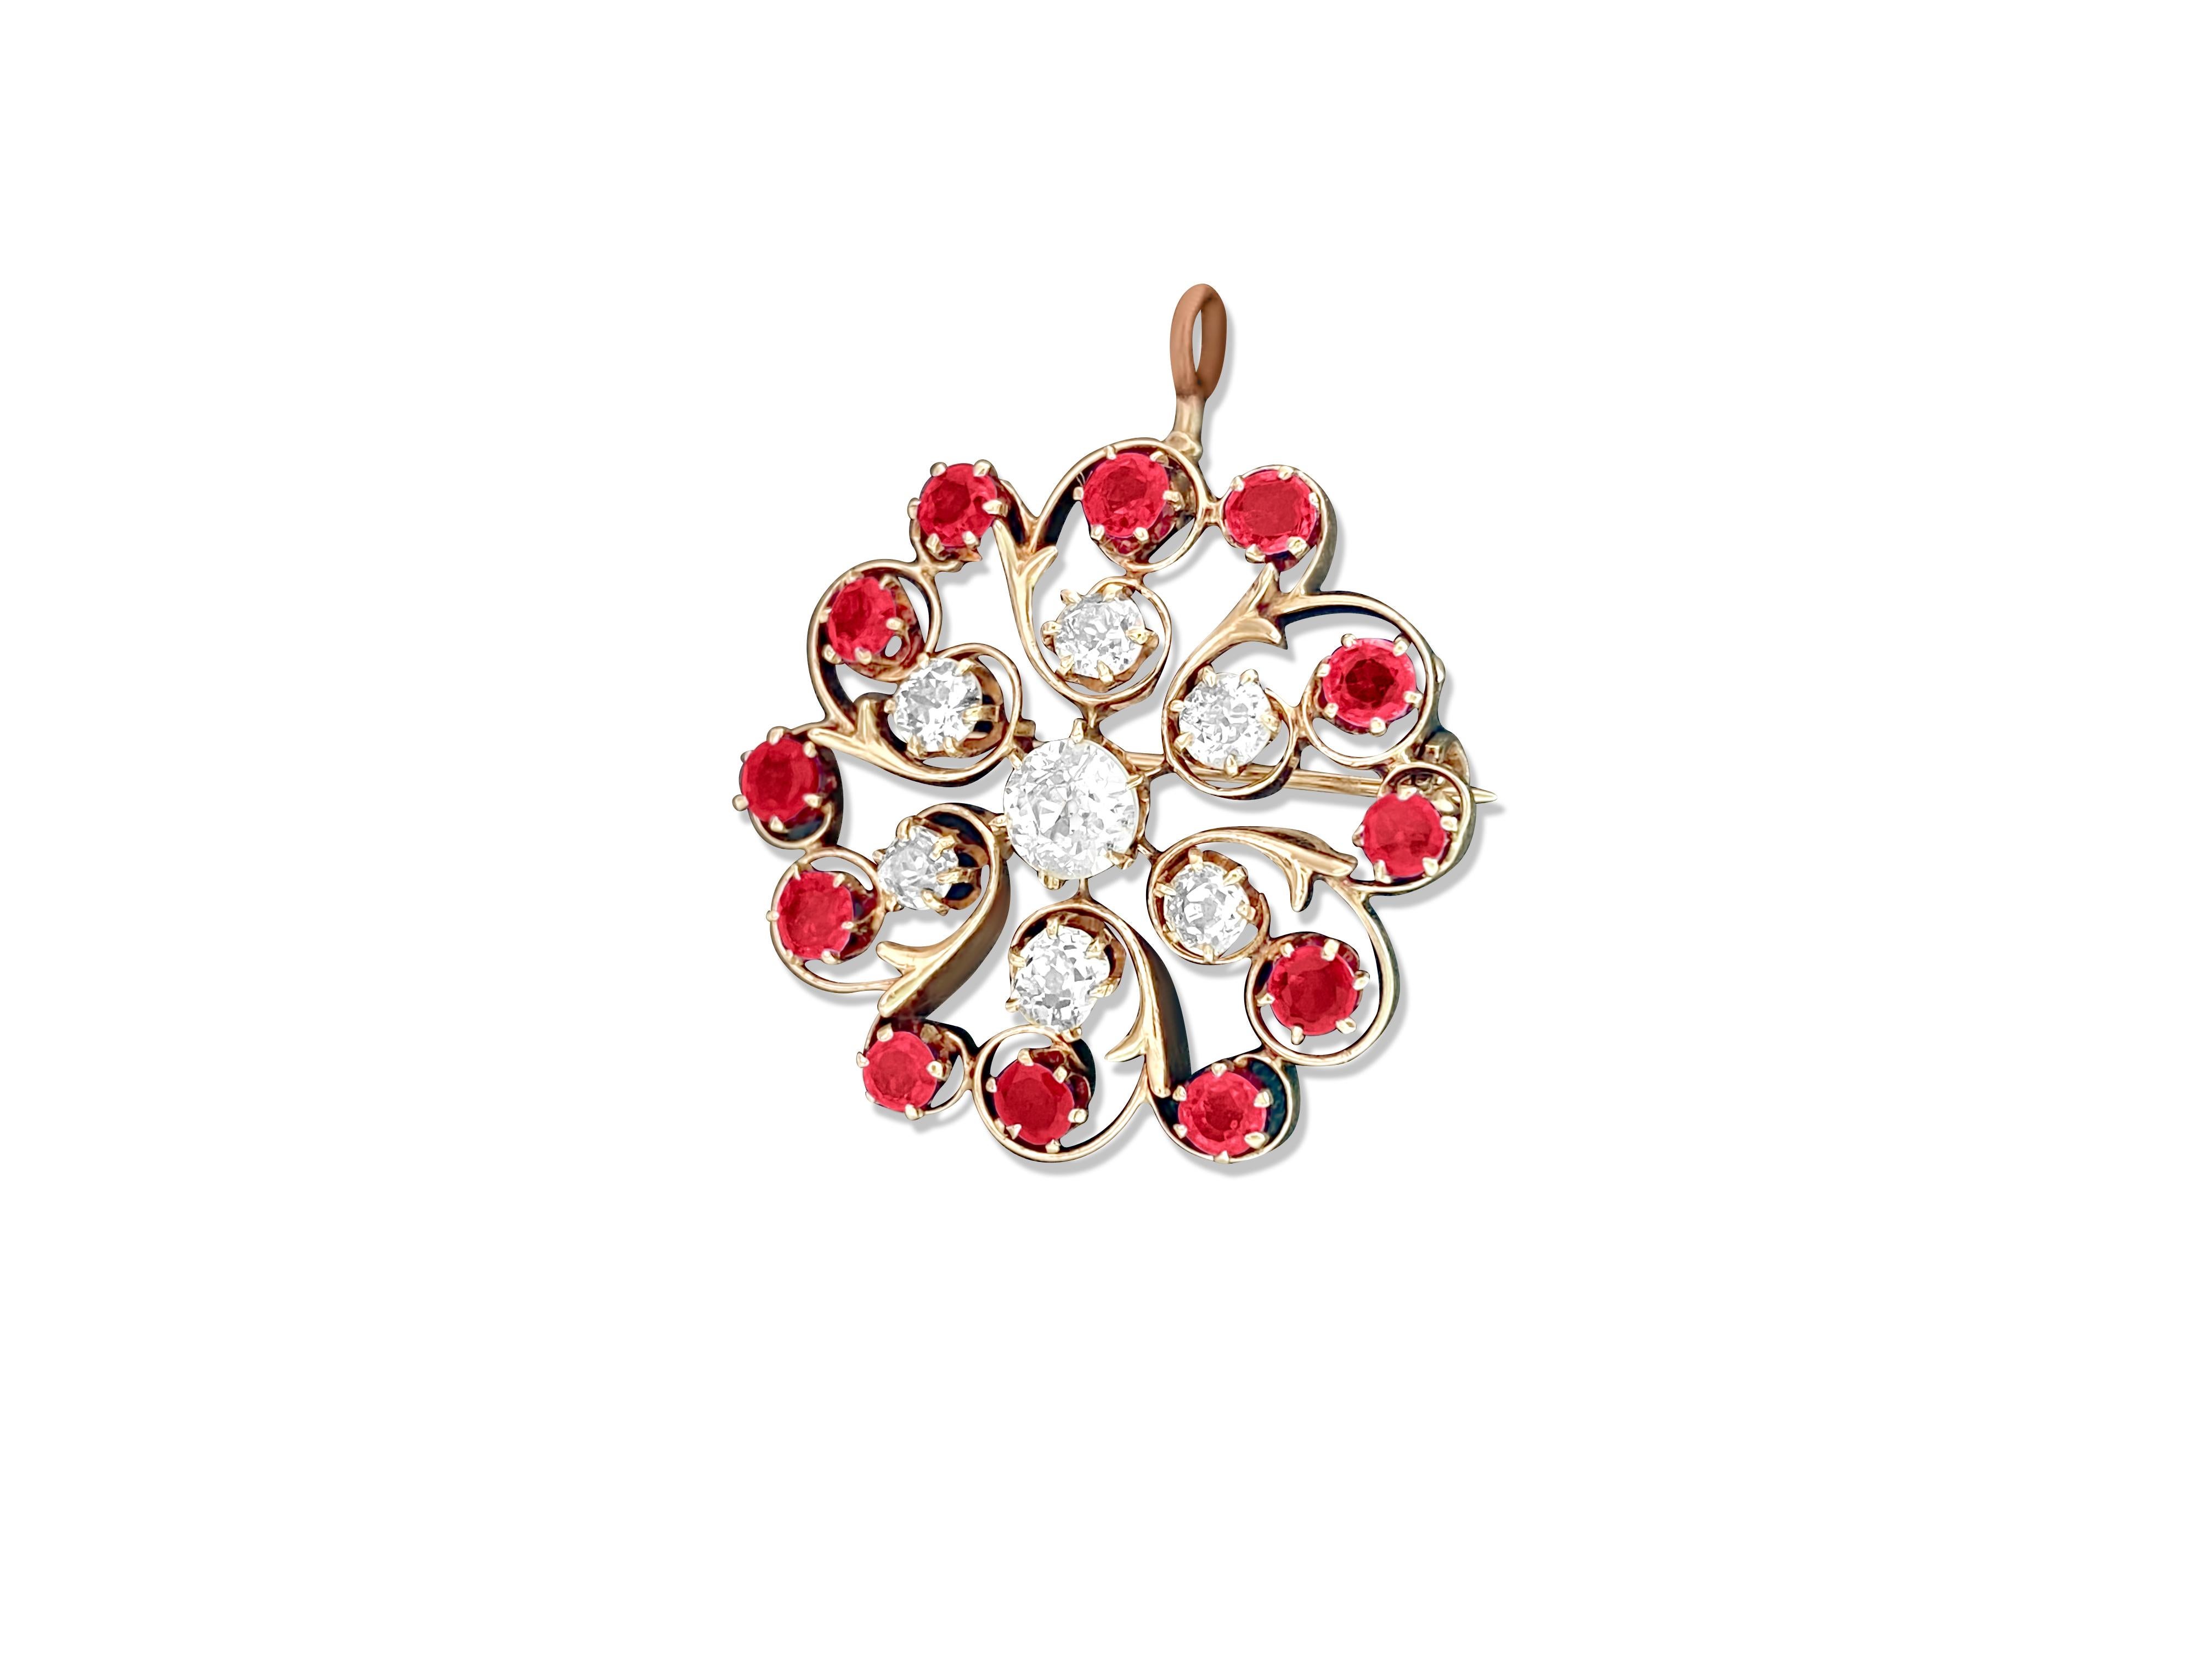 Contemporary Antique European 3.70 Ct Diamond and Ruby Pin. (GIA) For Sale